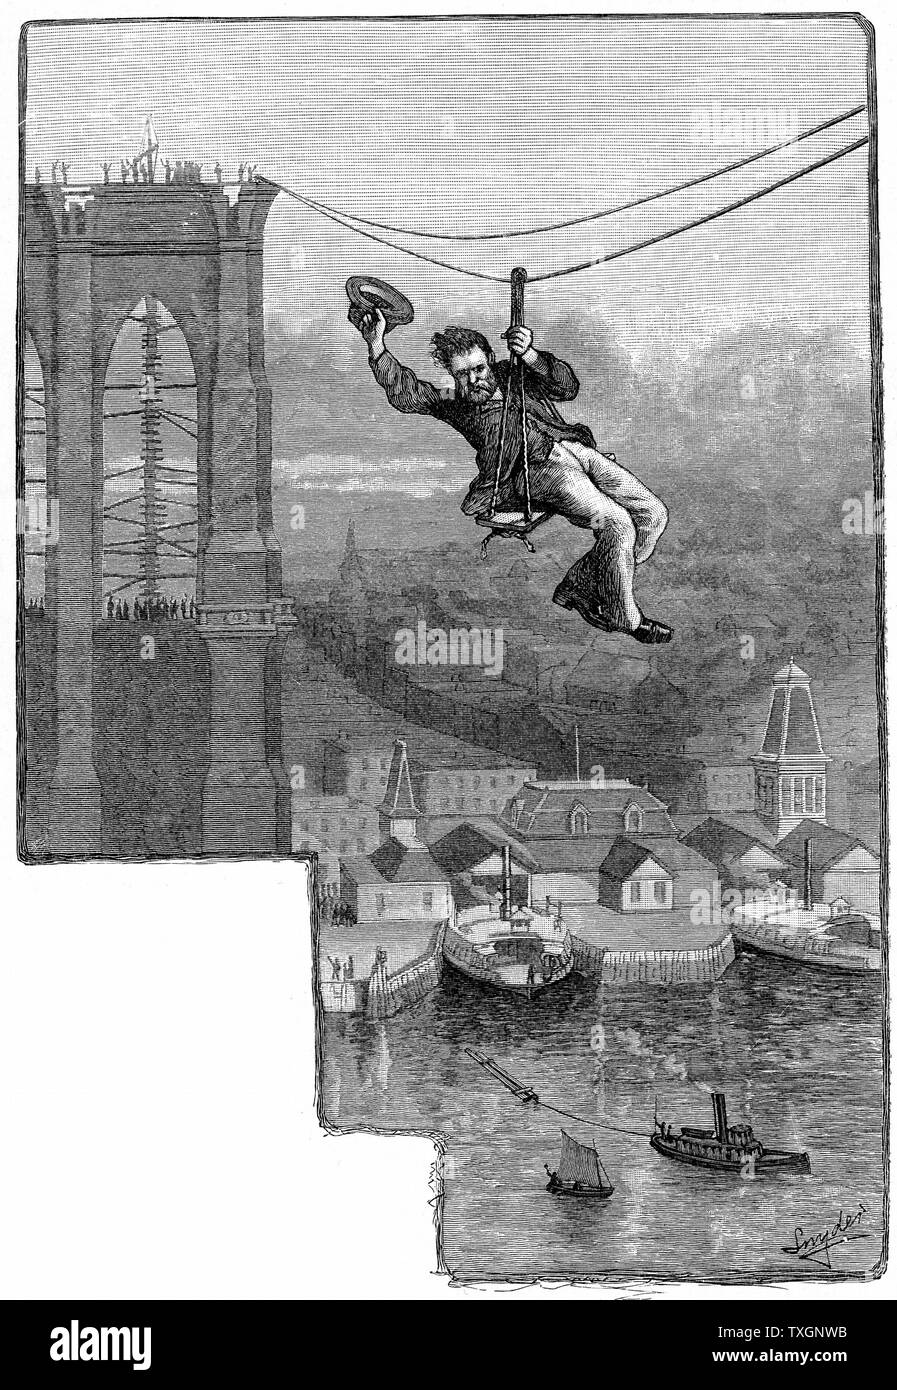 Brooklyn Suspension Bridge, New York:  E.F. Farrington, master mechanic on the bridge, testing the first span of wire cables.  Wood engraving published 1883, the year the bridge opened. Designed and built by J.A. and W.A. Roebling. Stock Photo